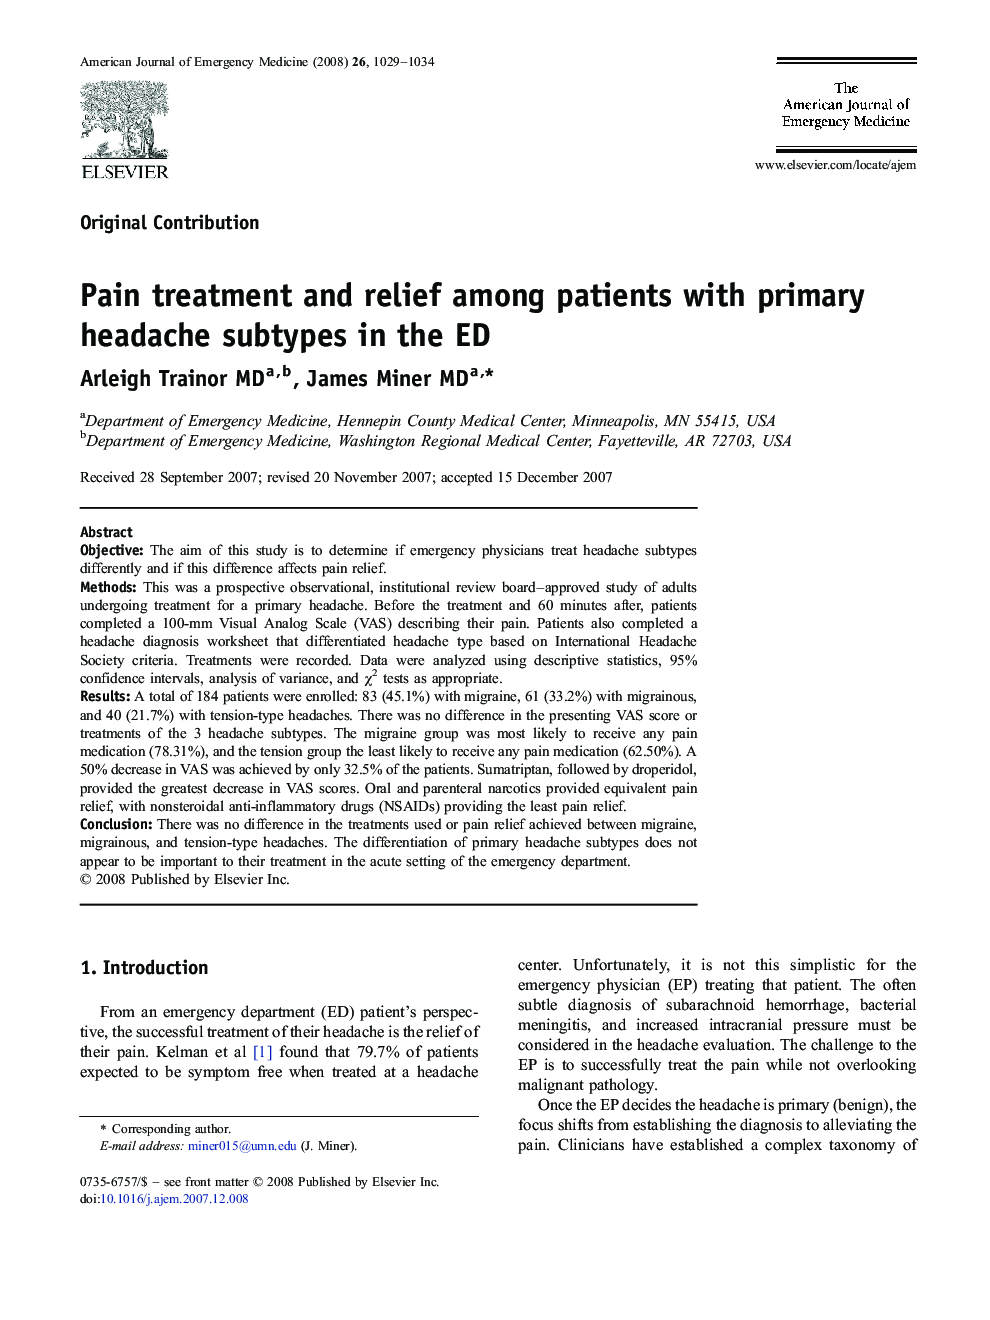 Pain treatment and relief among patients with primary headache subtypes in the ED